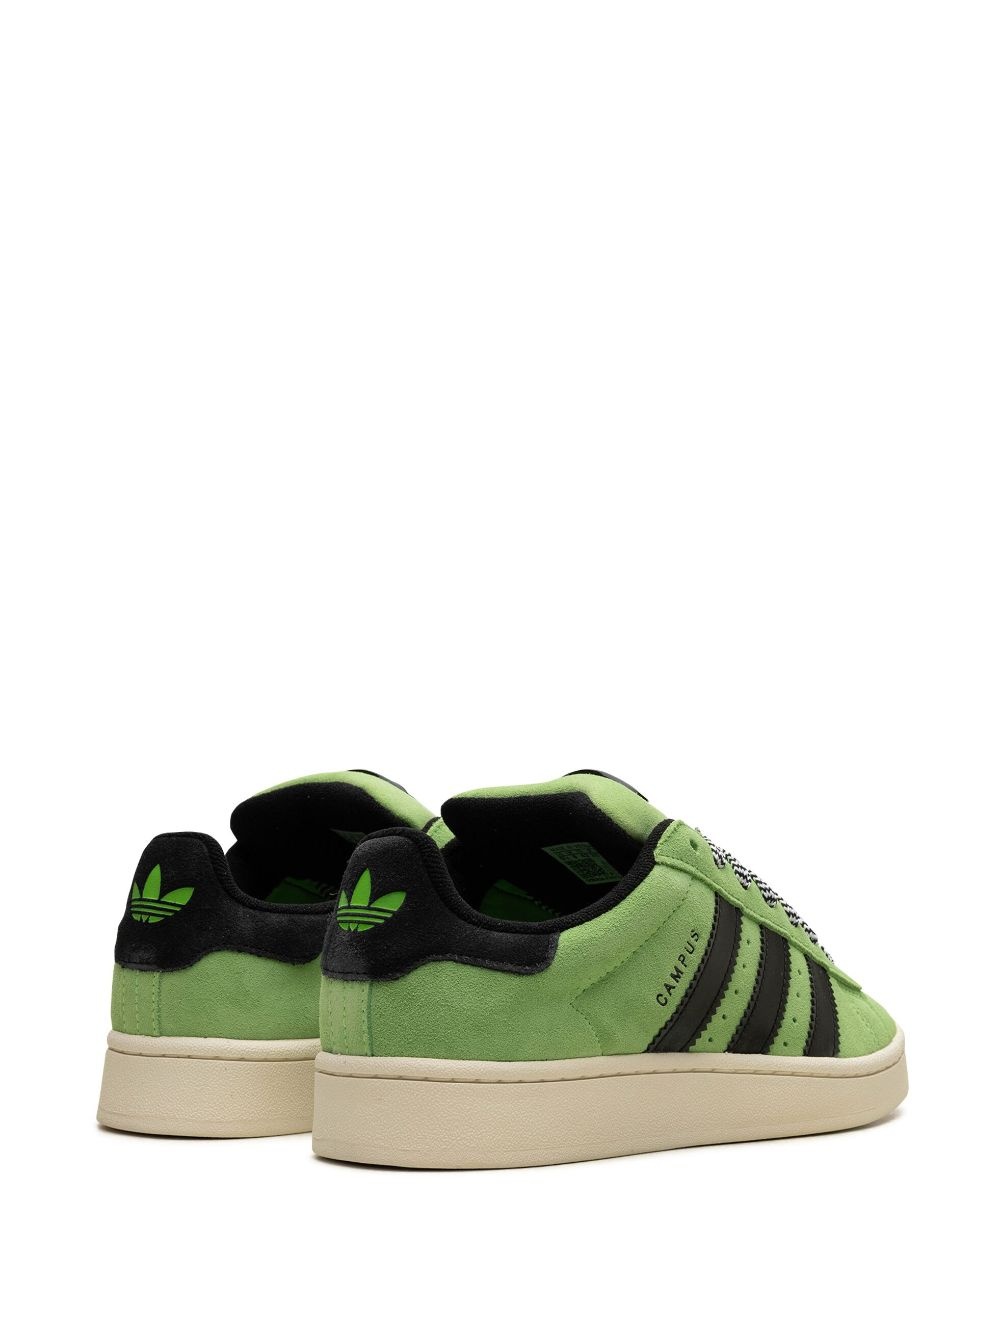 Campus 00s "Solar Green" sneakers - 3